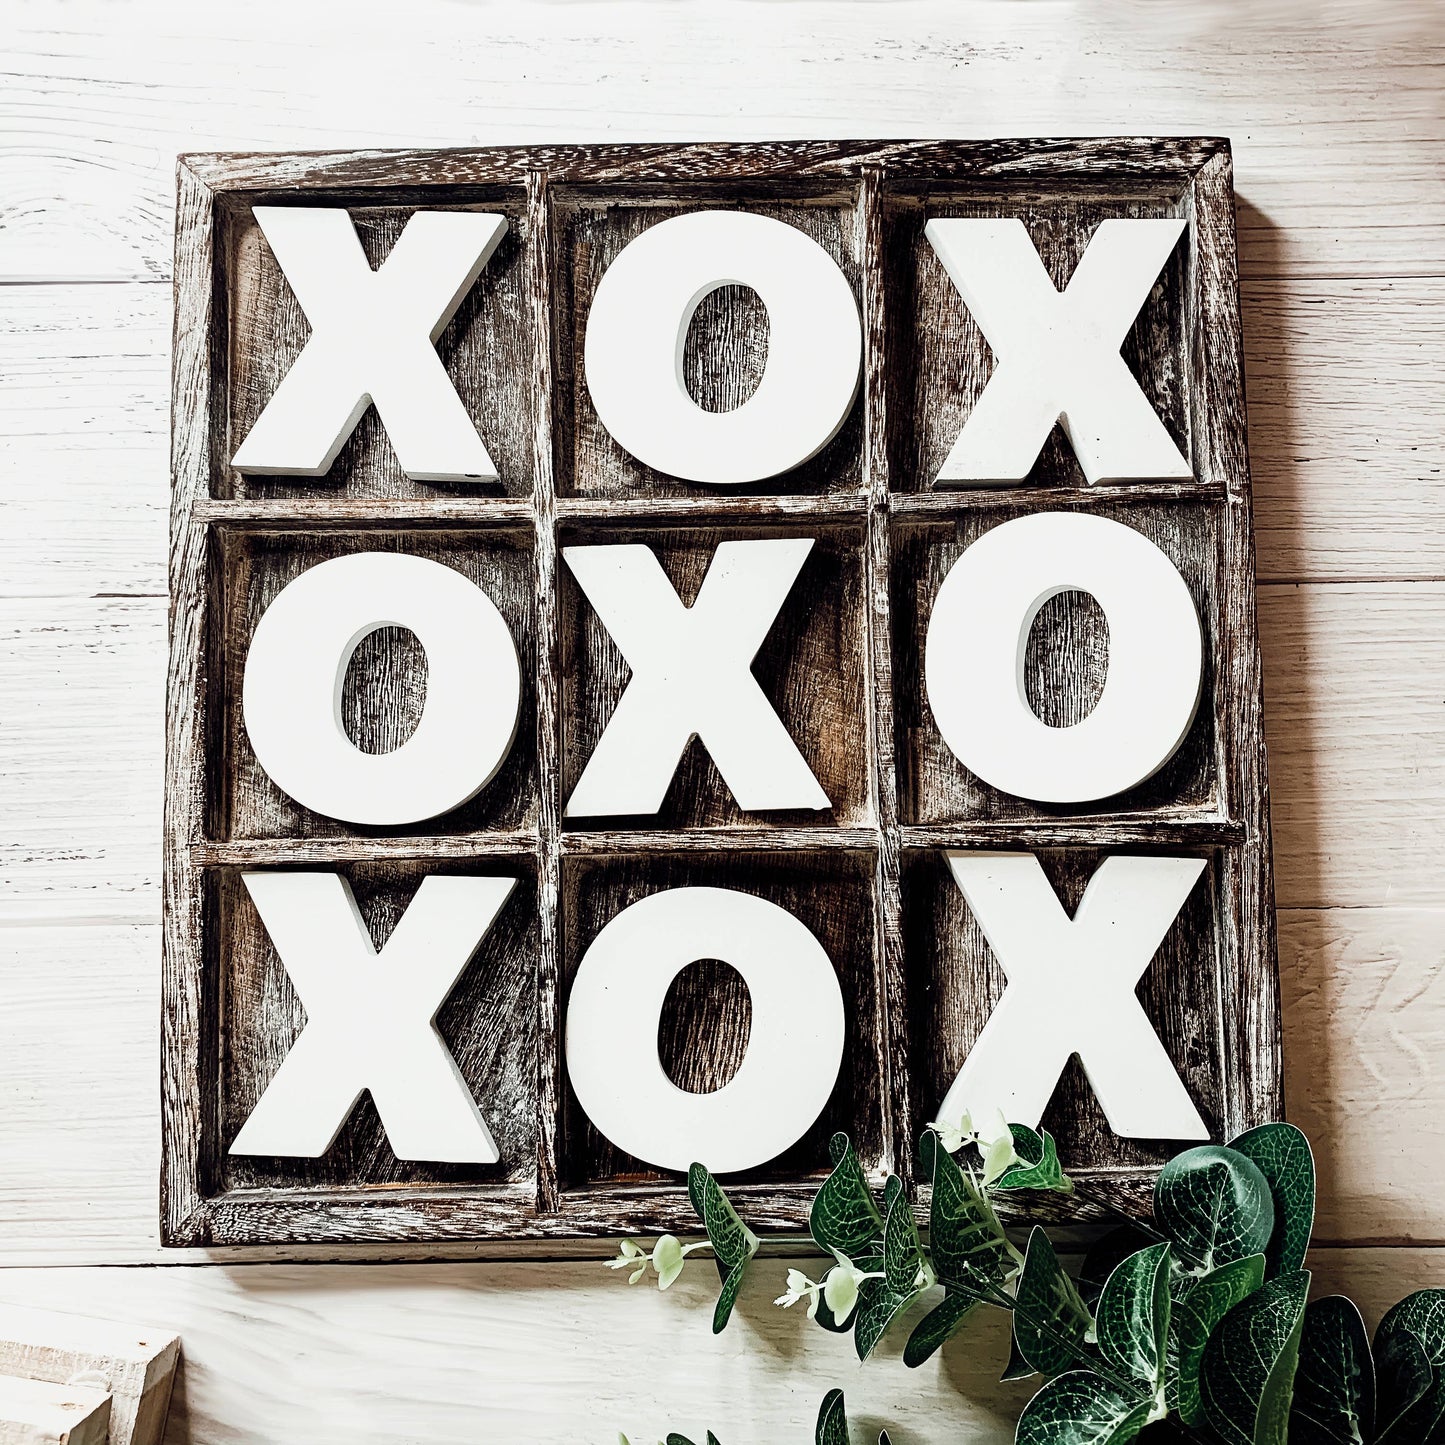 Wooden Tabletop Game + Decor, Tic Tac Toe Wood Game, Rustic